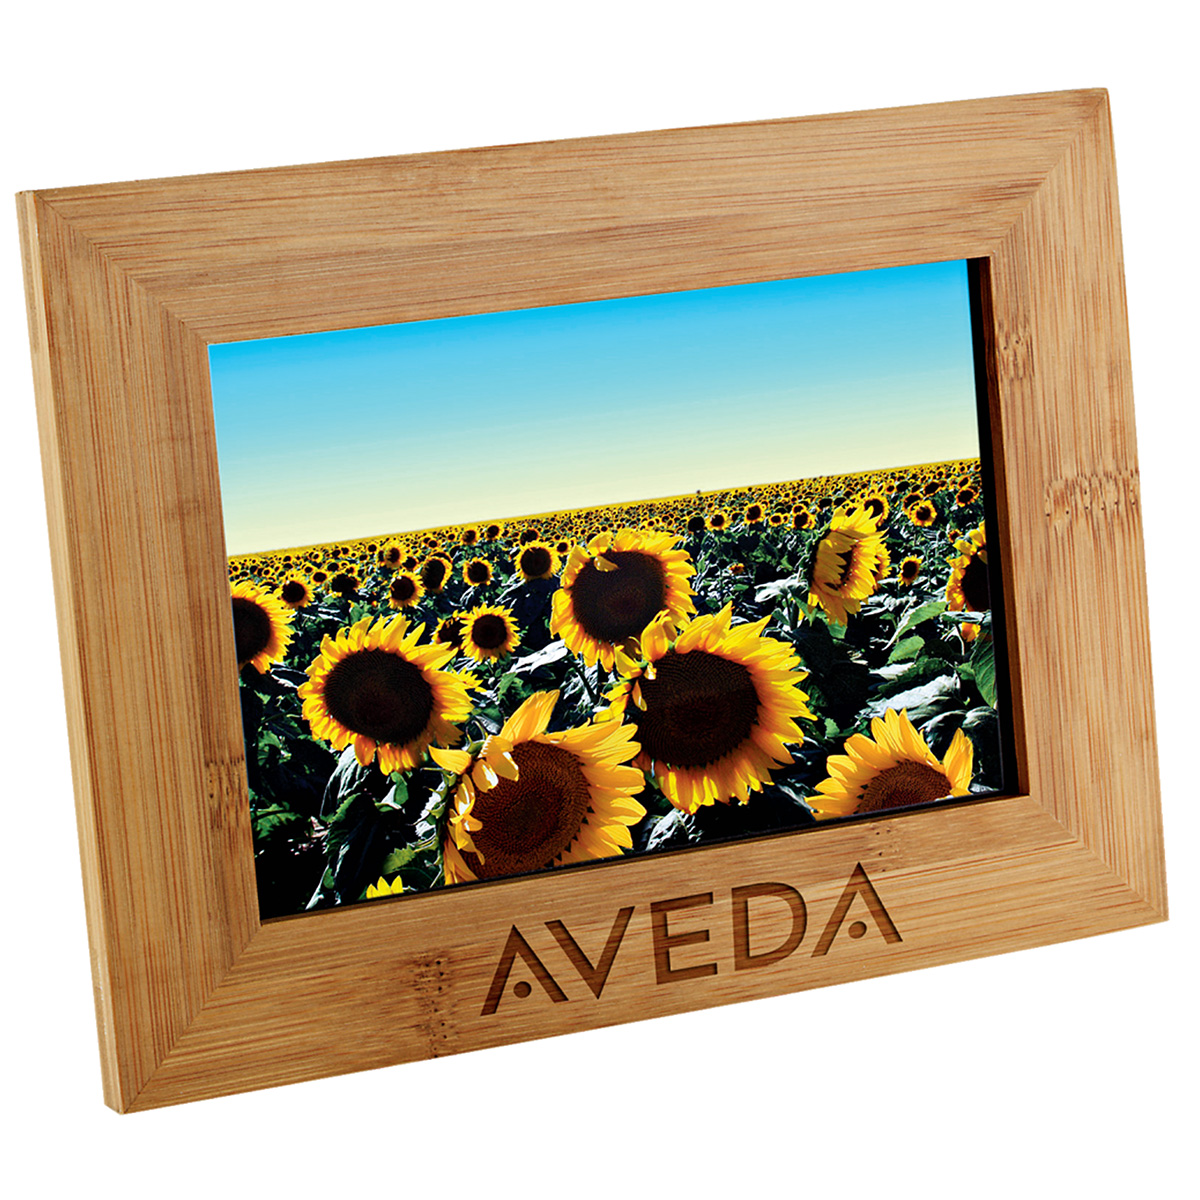 Personalized Photo Frames | Bamboo